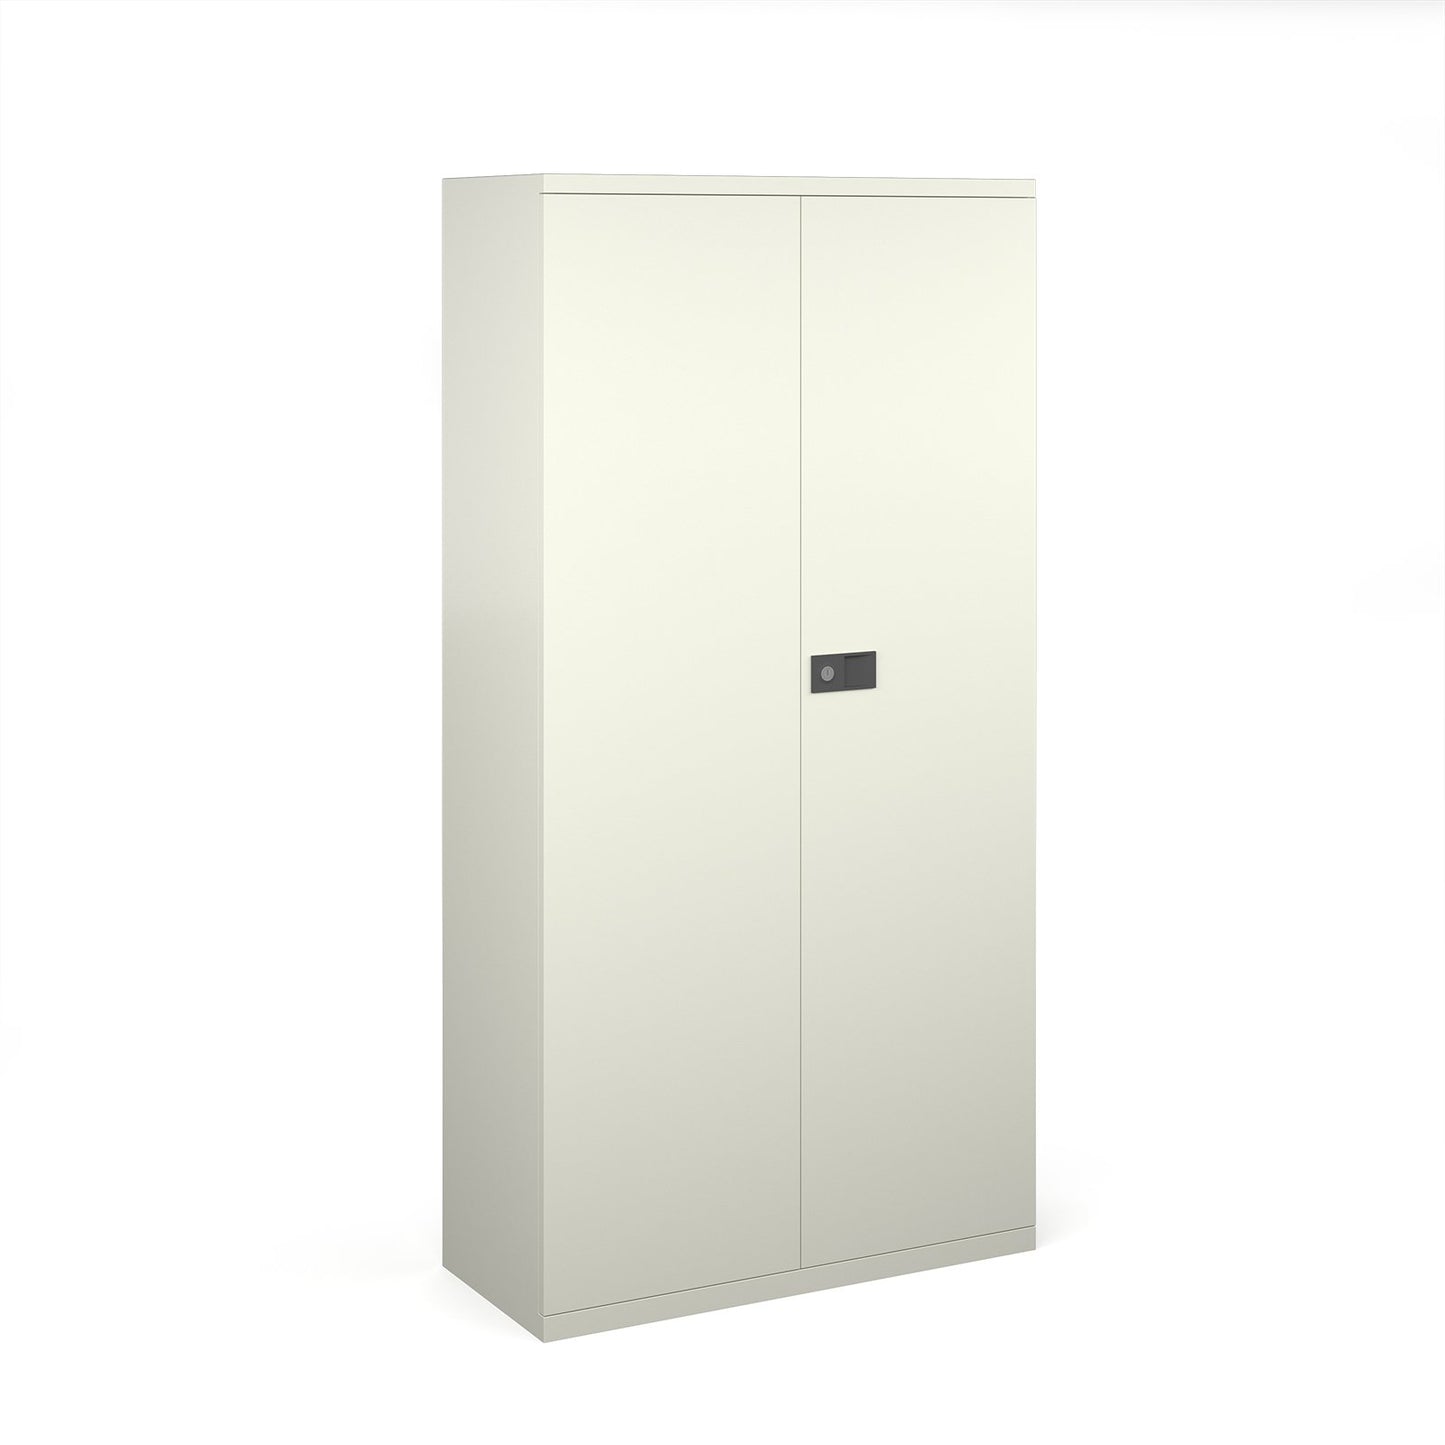 Steel Contract Cupboard 1968mm High - White